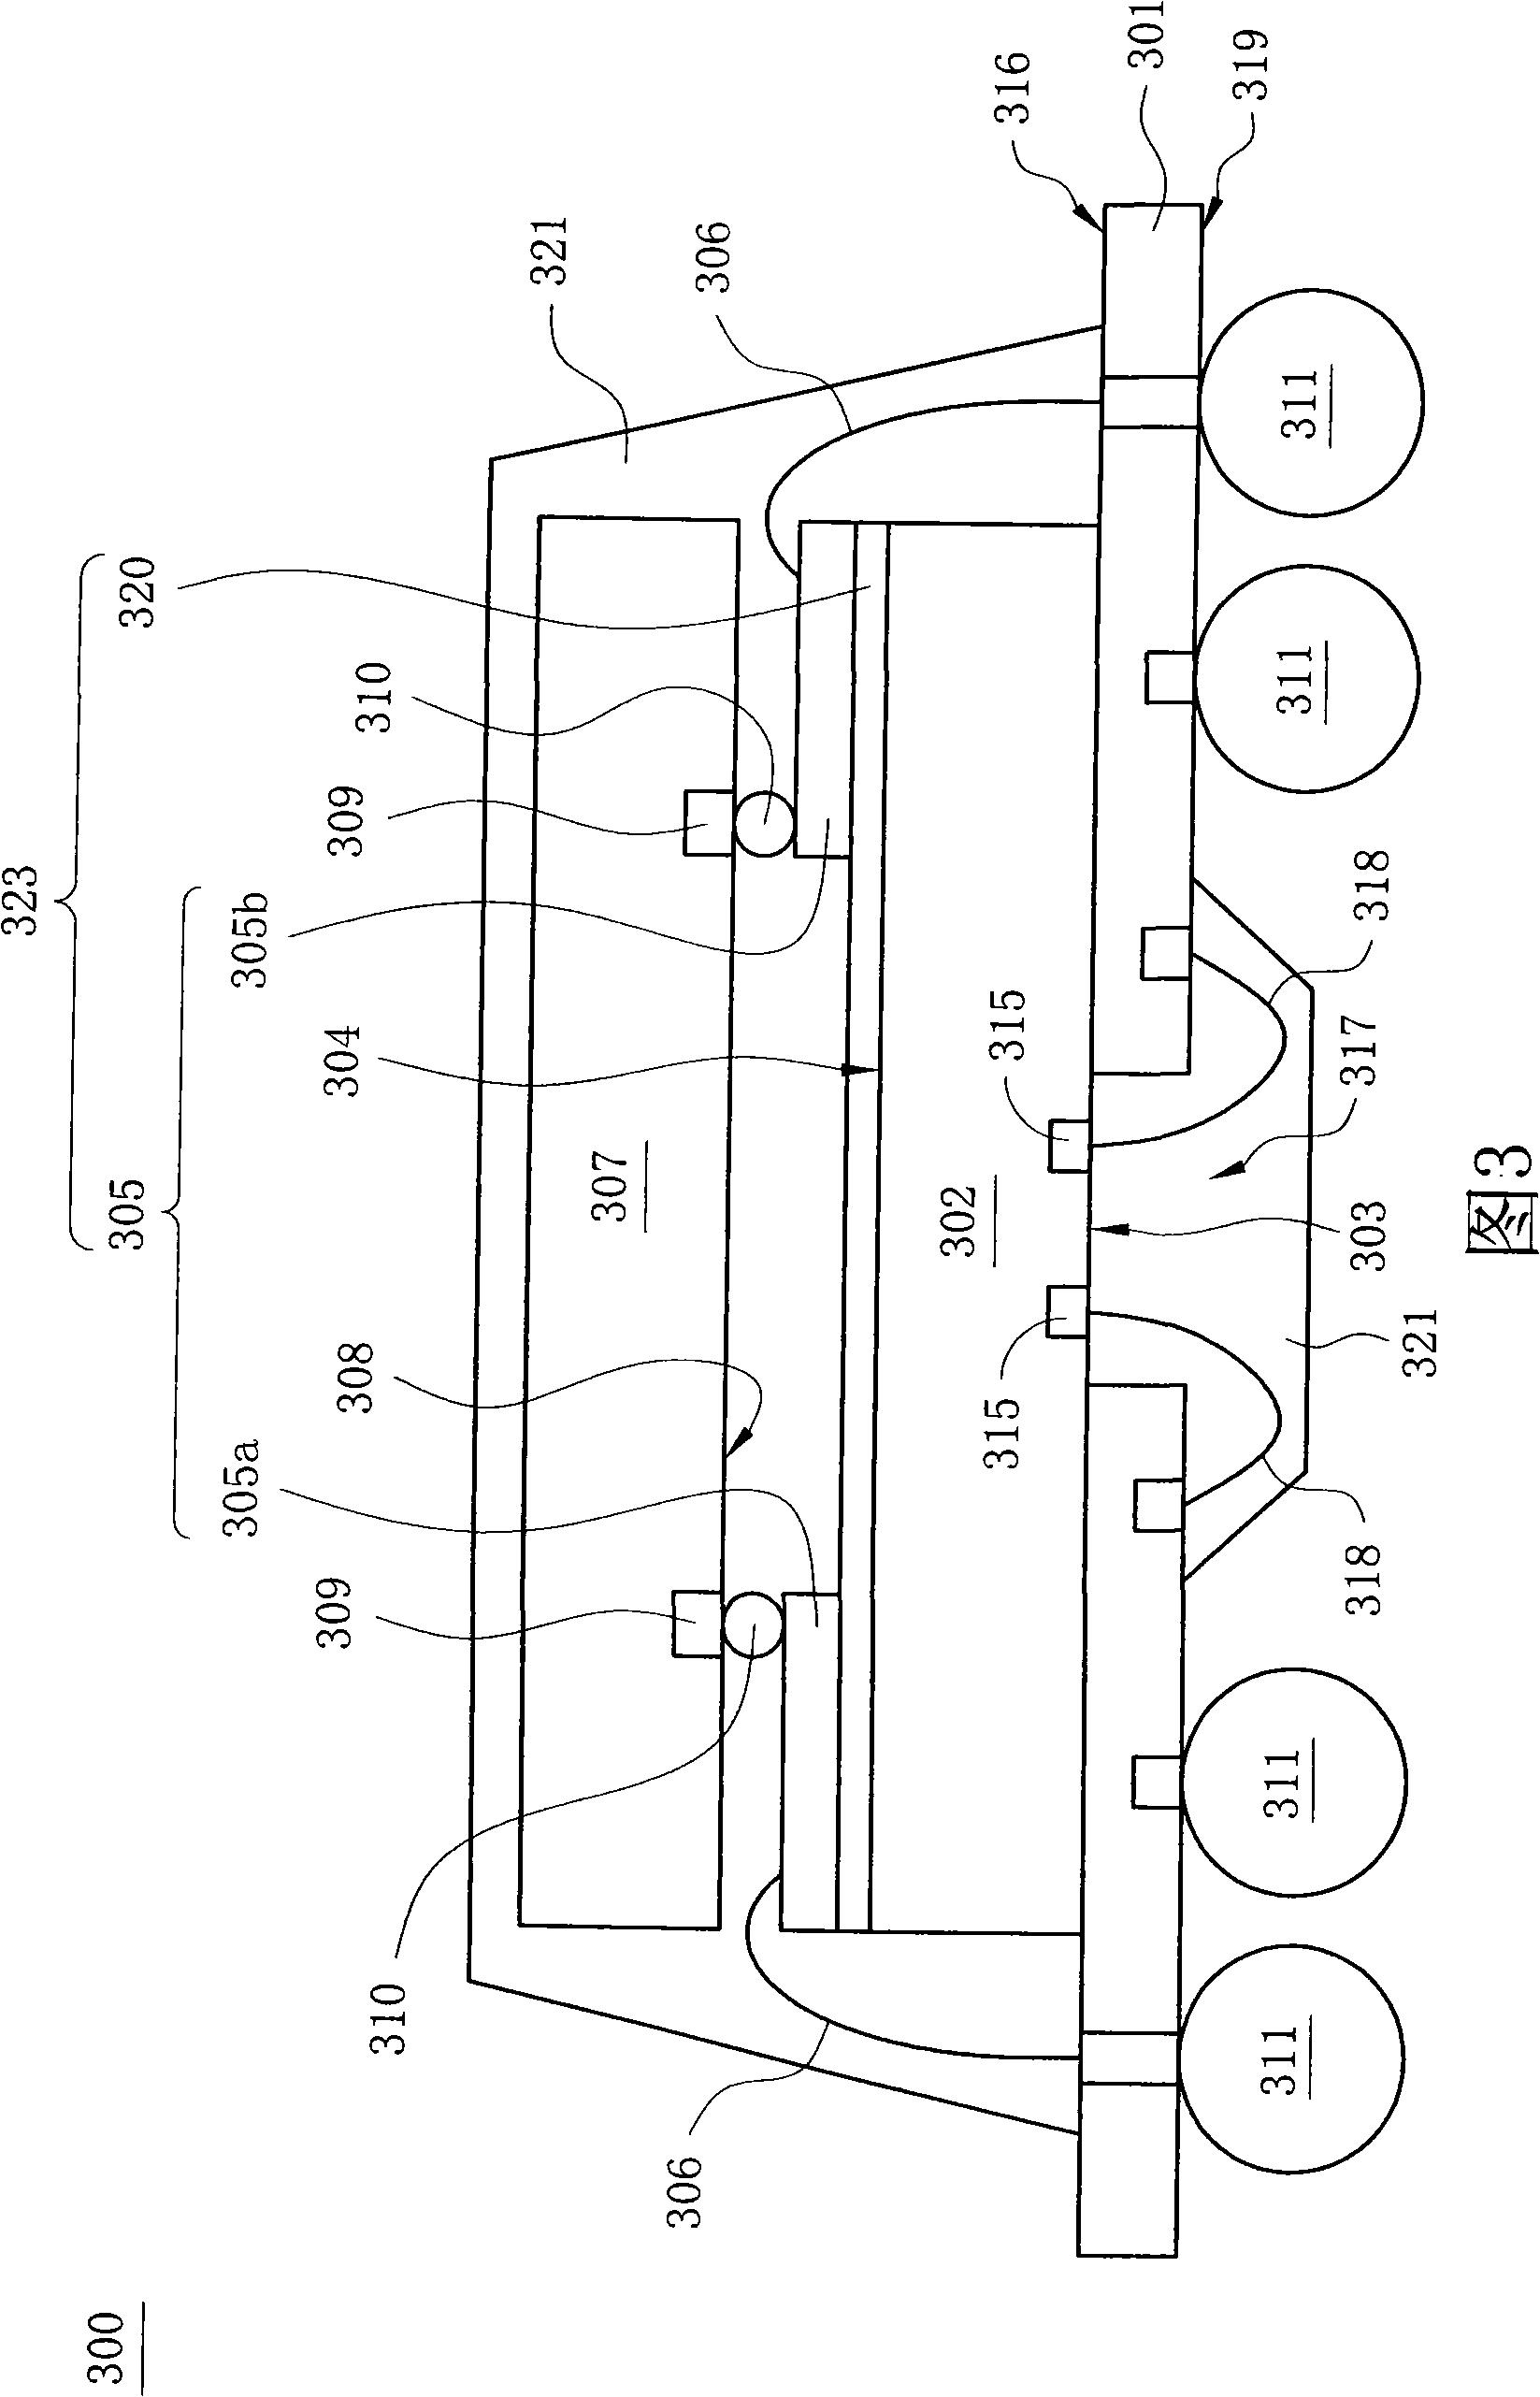 Chip stack packaging structure and method of producing the same